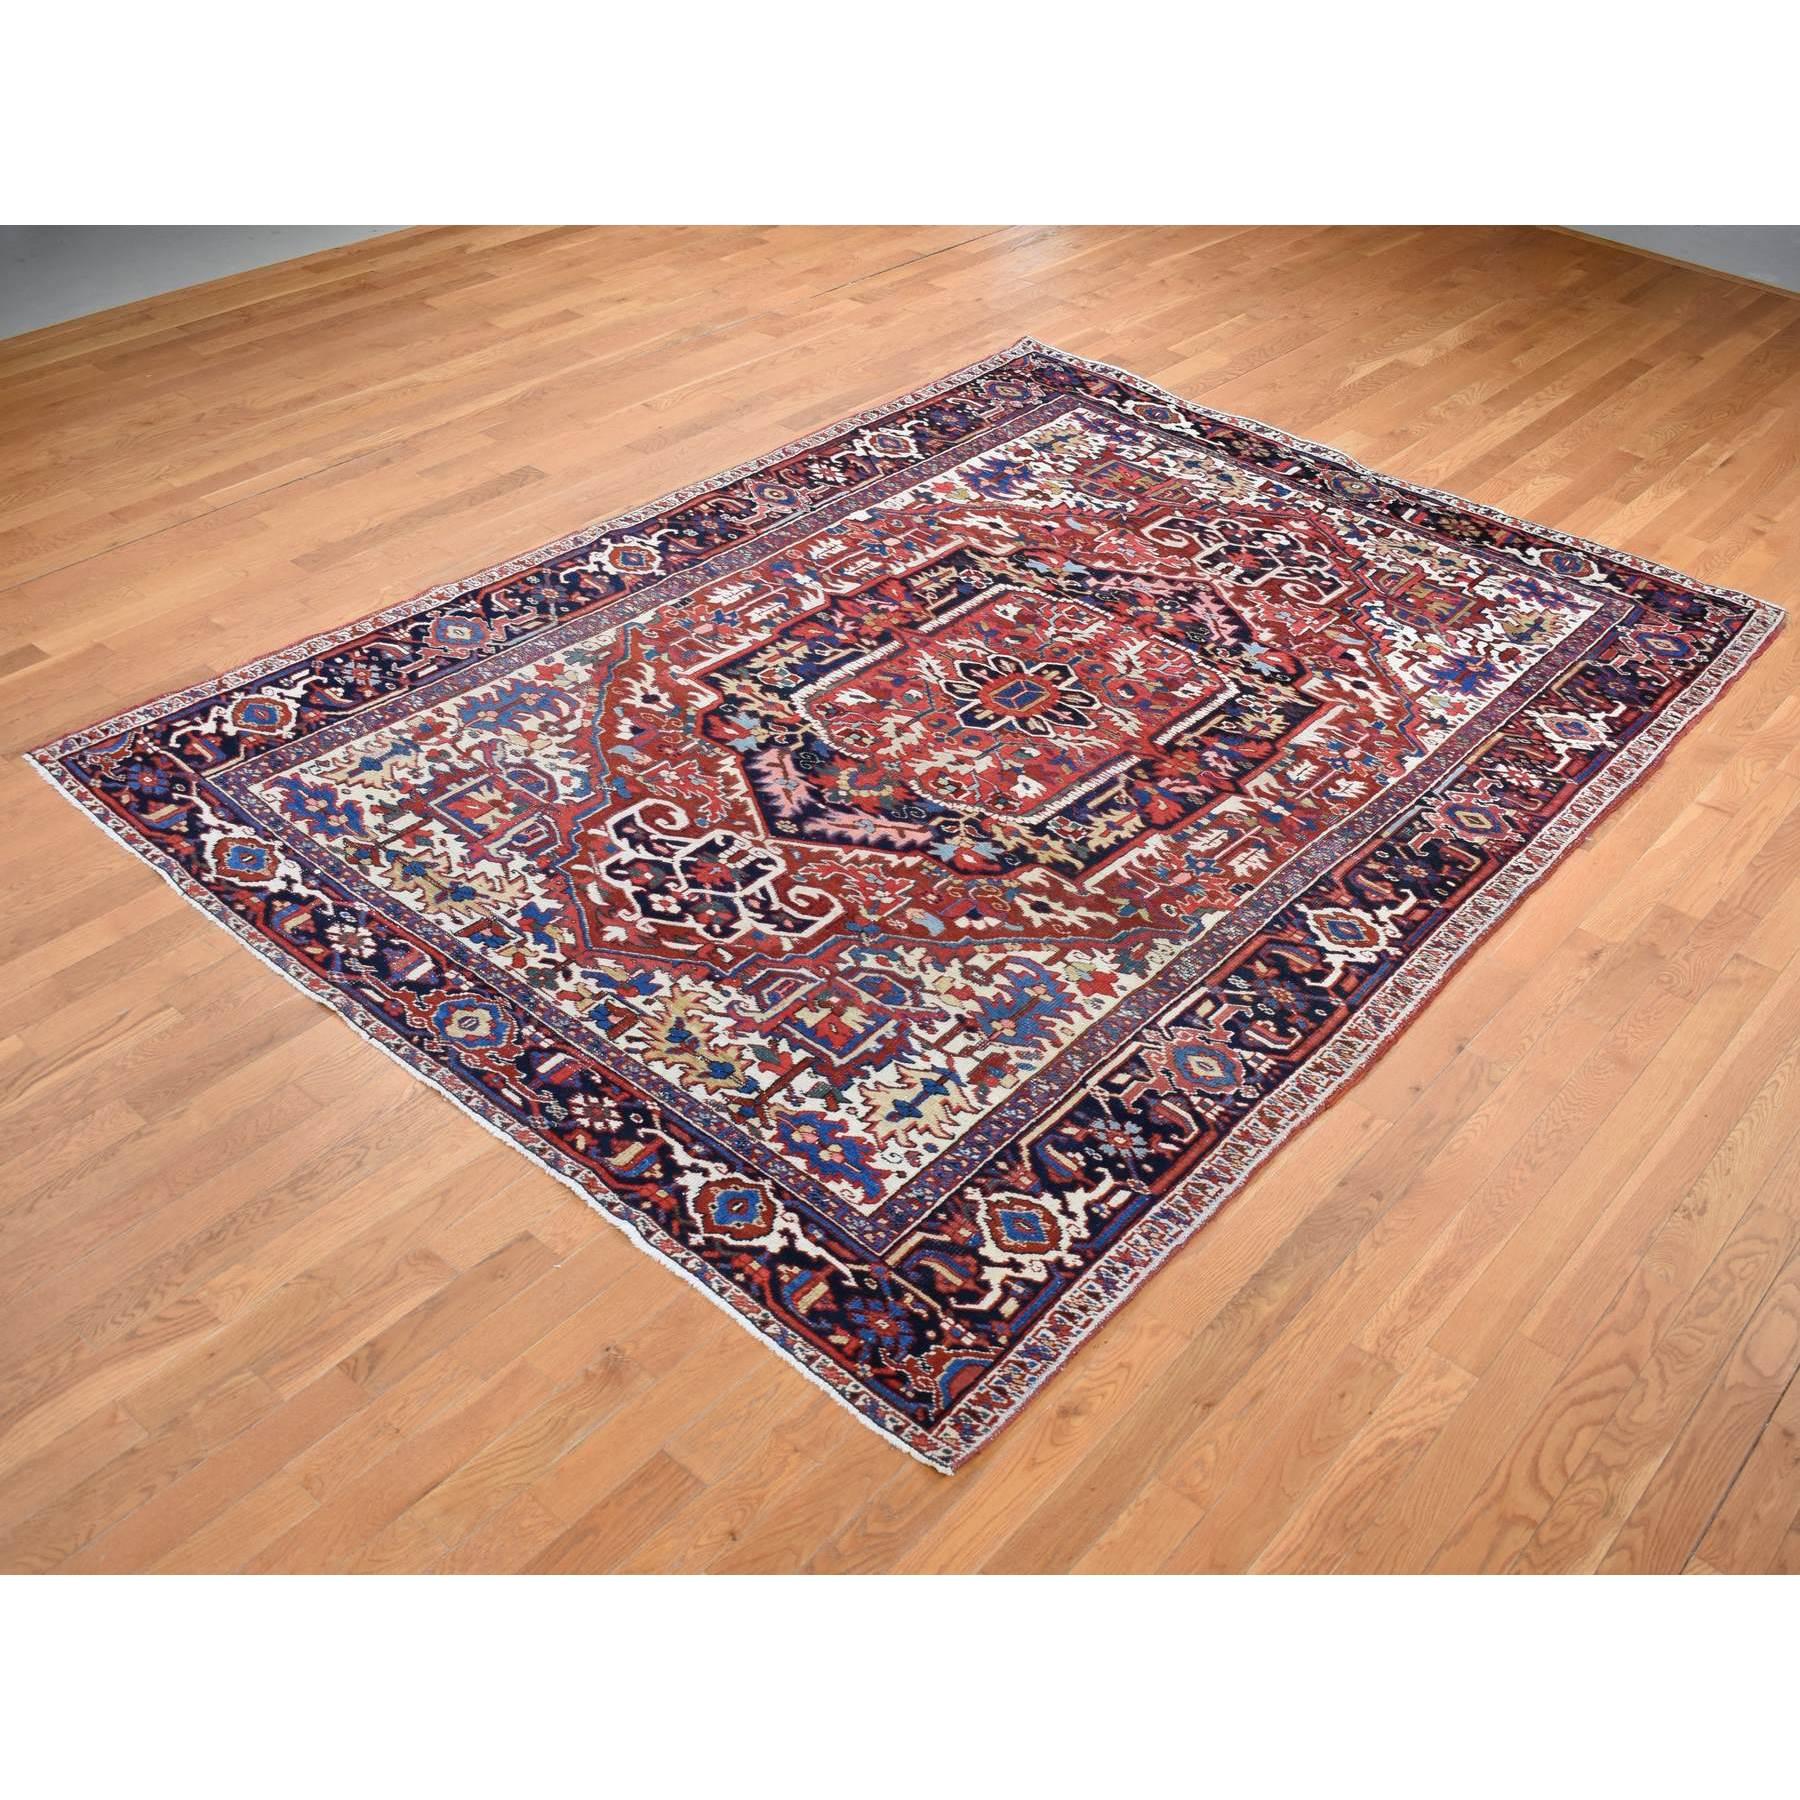 Medieval Burgundy Red Pure Wool Hand Knotted Antique Persian Heriz Evenly Worn Clean Rug For Sale